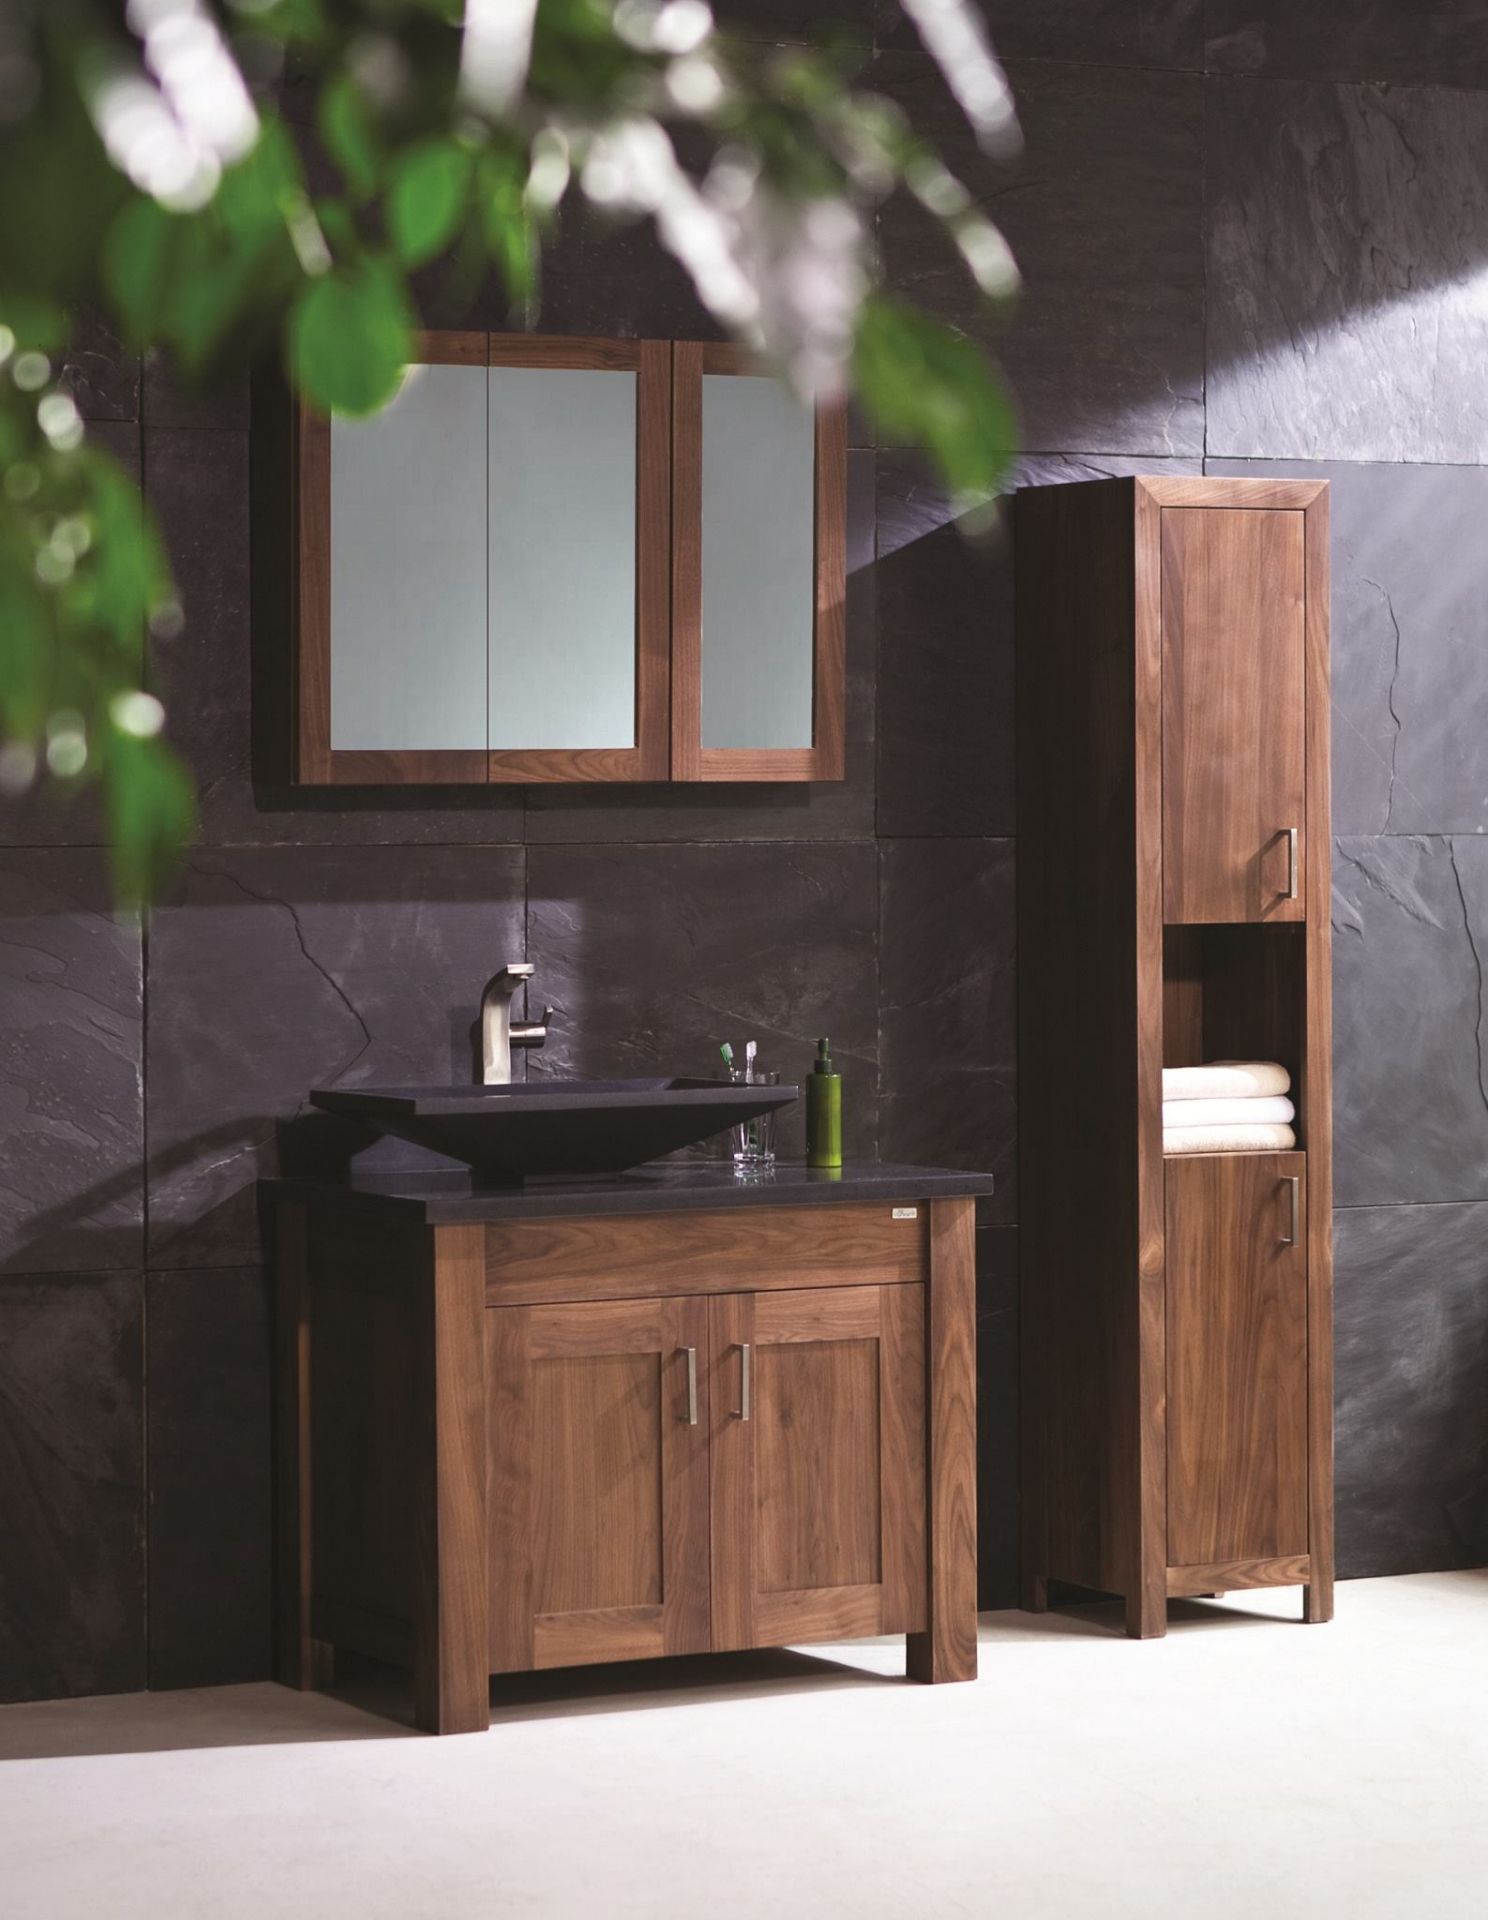 1 x Stonearth 'Finesse' Countertop Washstand - American Solid Walnut - Original RRP £1,400 - Image 3 of 8